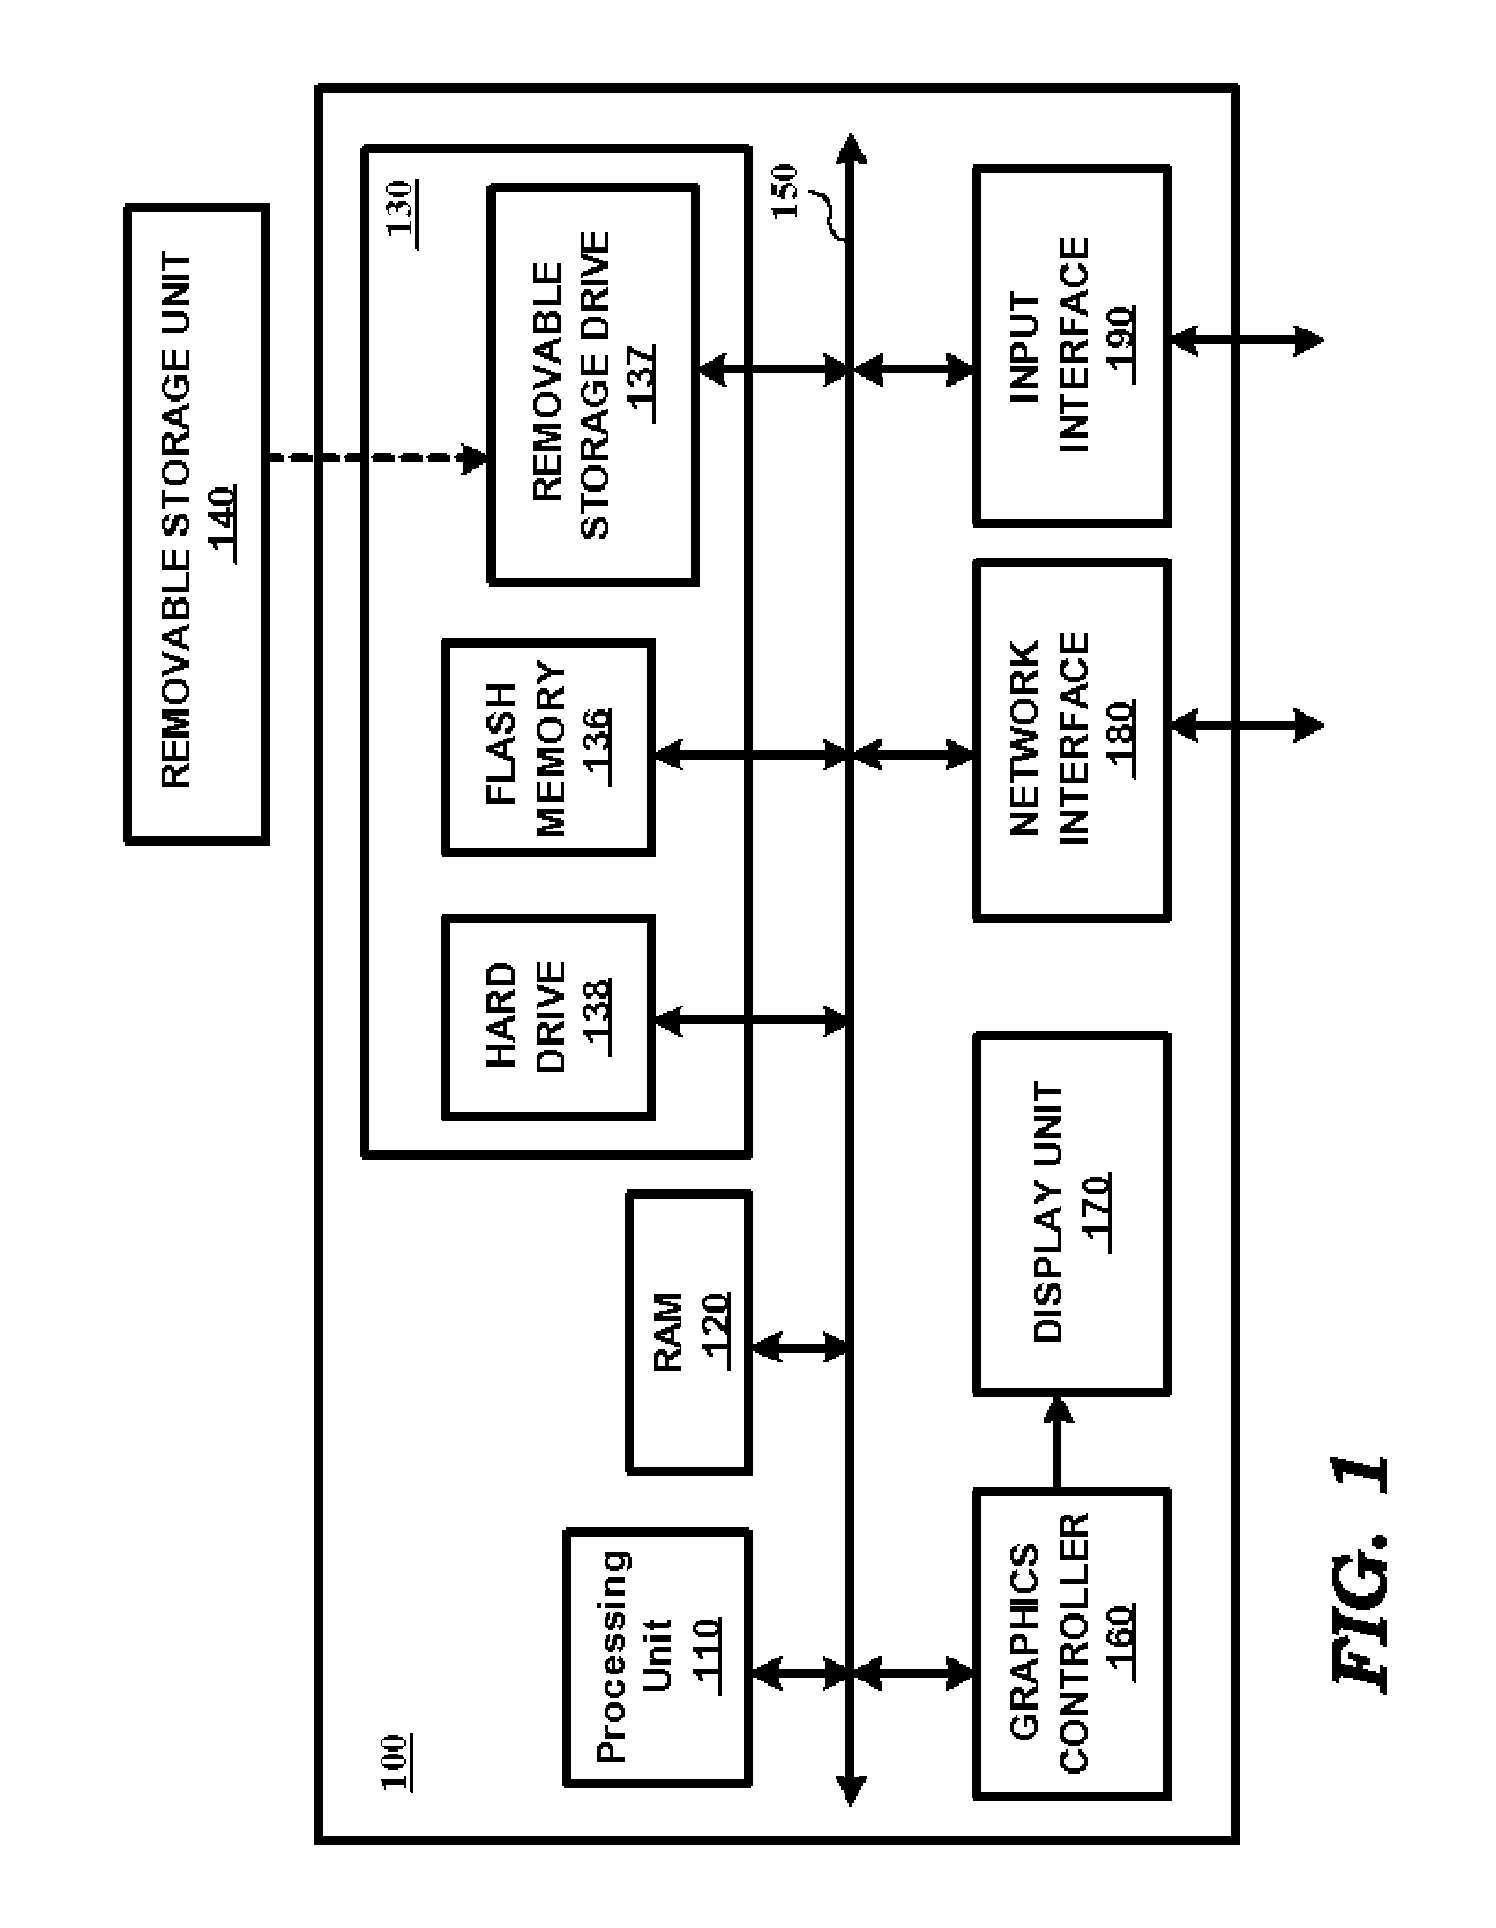 Power grid design in an integrated circuit